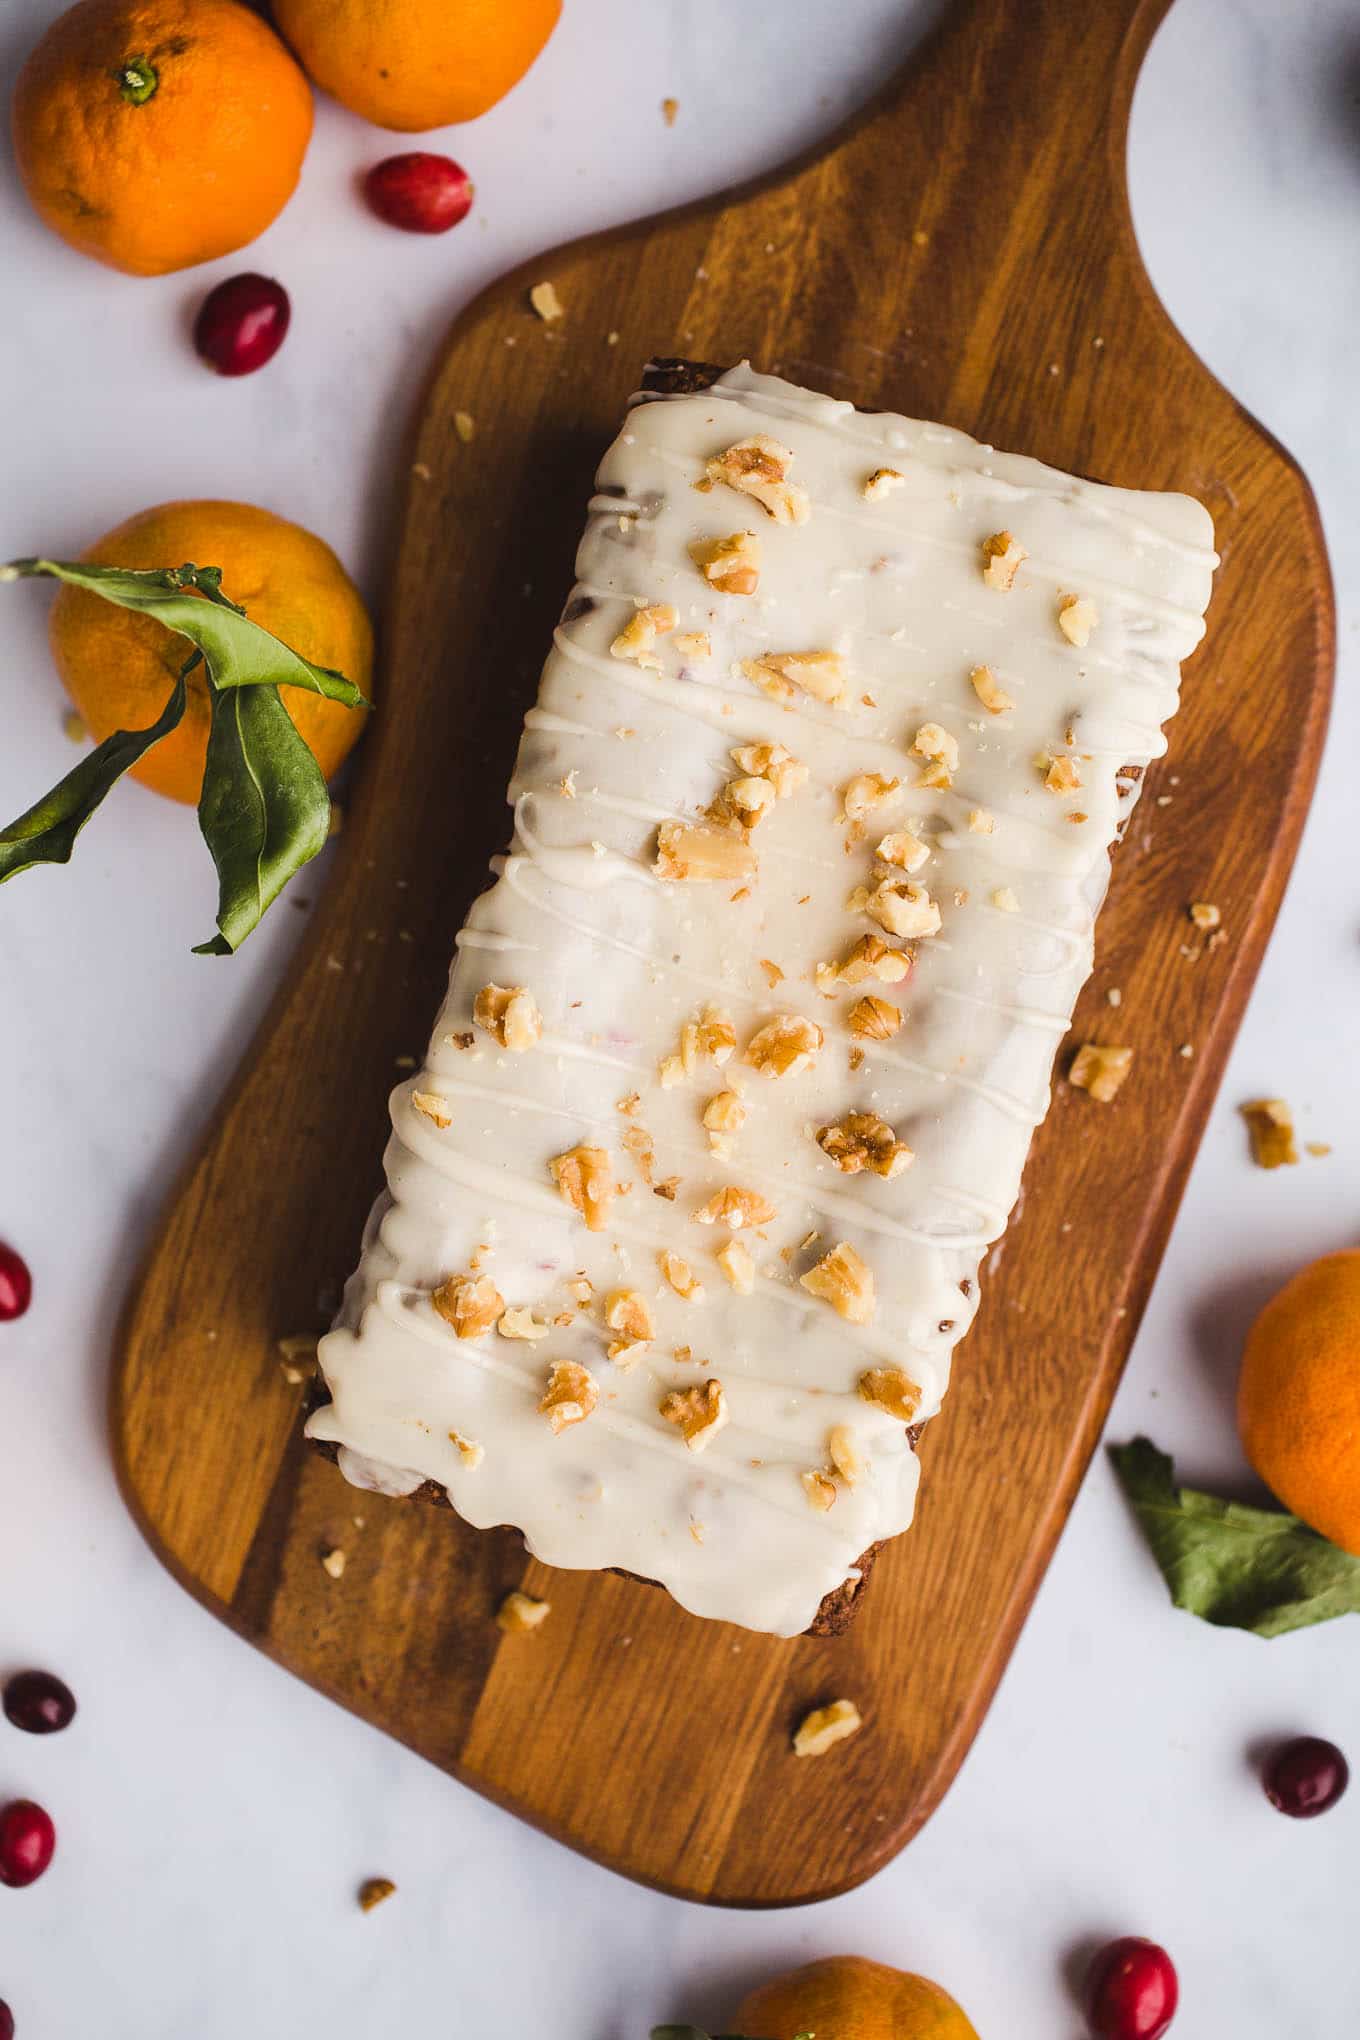 A healthier, moist, Gluten-Free Cranberry Orange Bread with an orange glaze made with almond and oat flours. Vegan. Have it for breakfast or dessert!